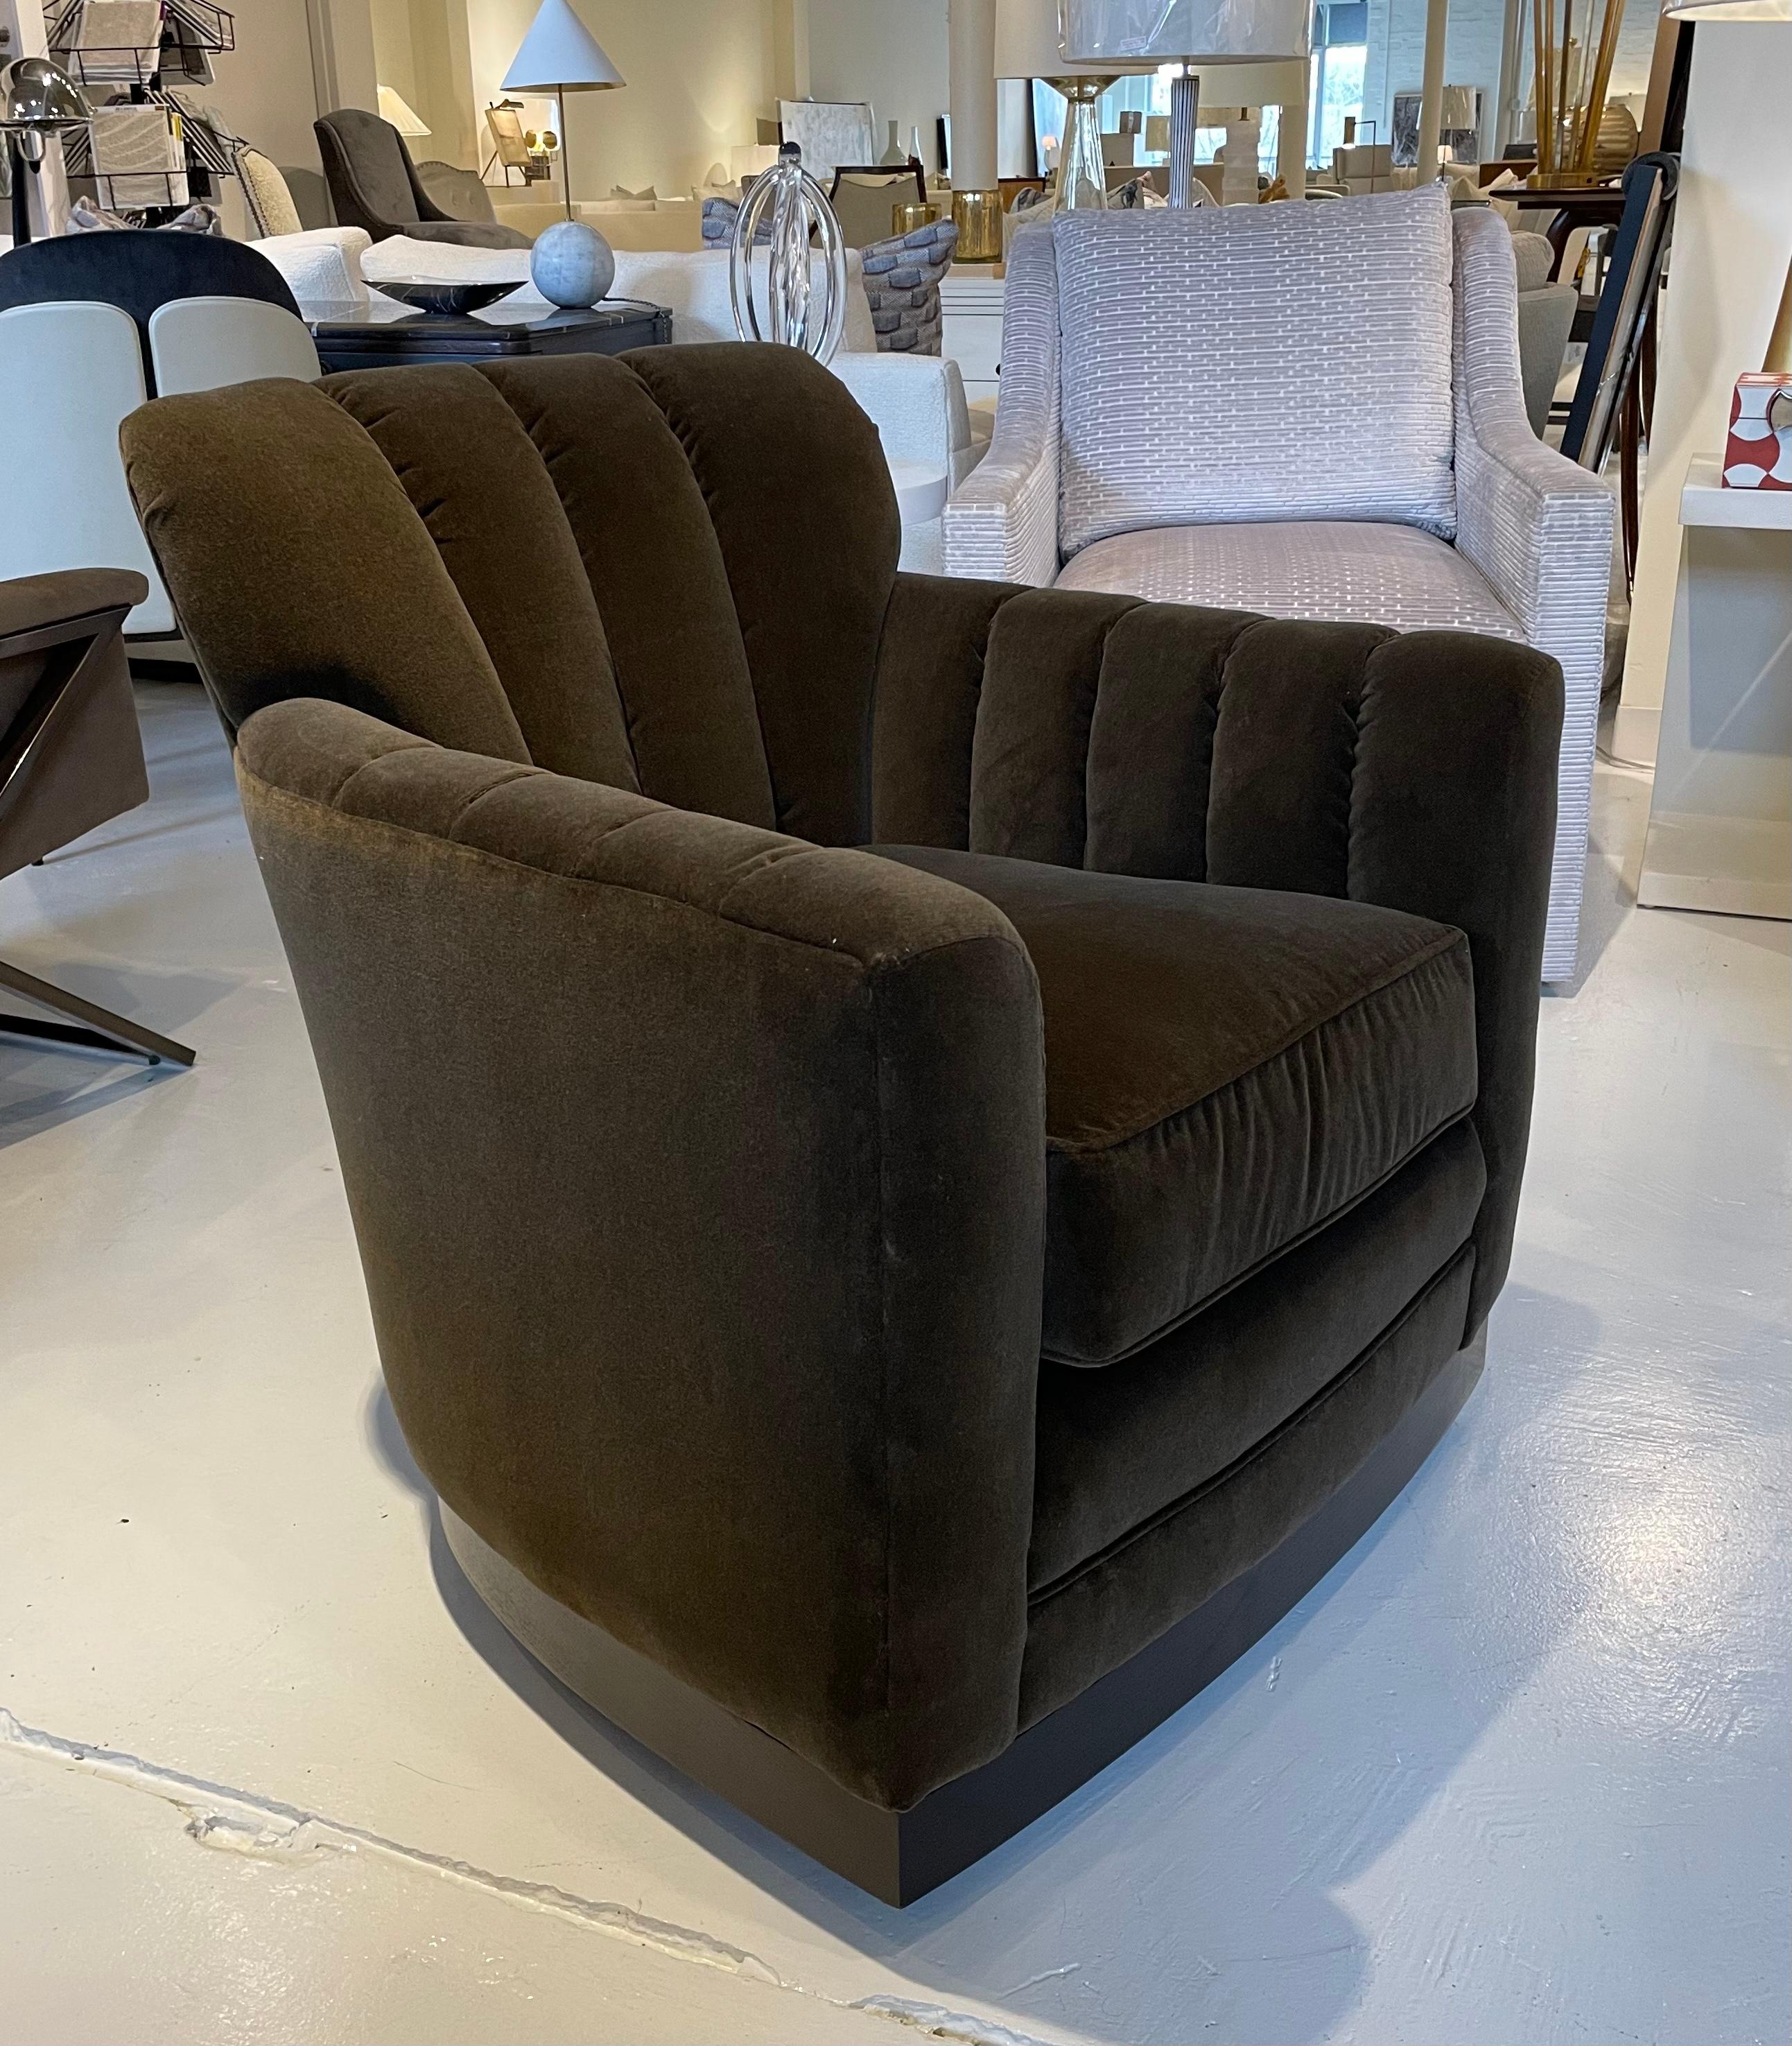 Showroom new. Paris swivel channel back chair. Wood swivel base with 360 degree swivel. Spring-down seat cushion - Premium cushion. Feels supportive, yet has down like softness. Covered in rich brown velvet.